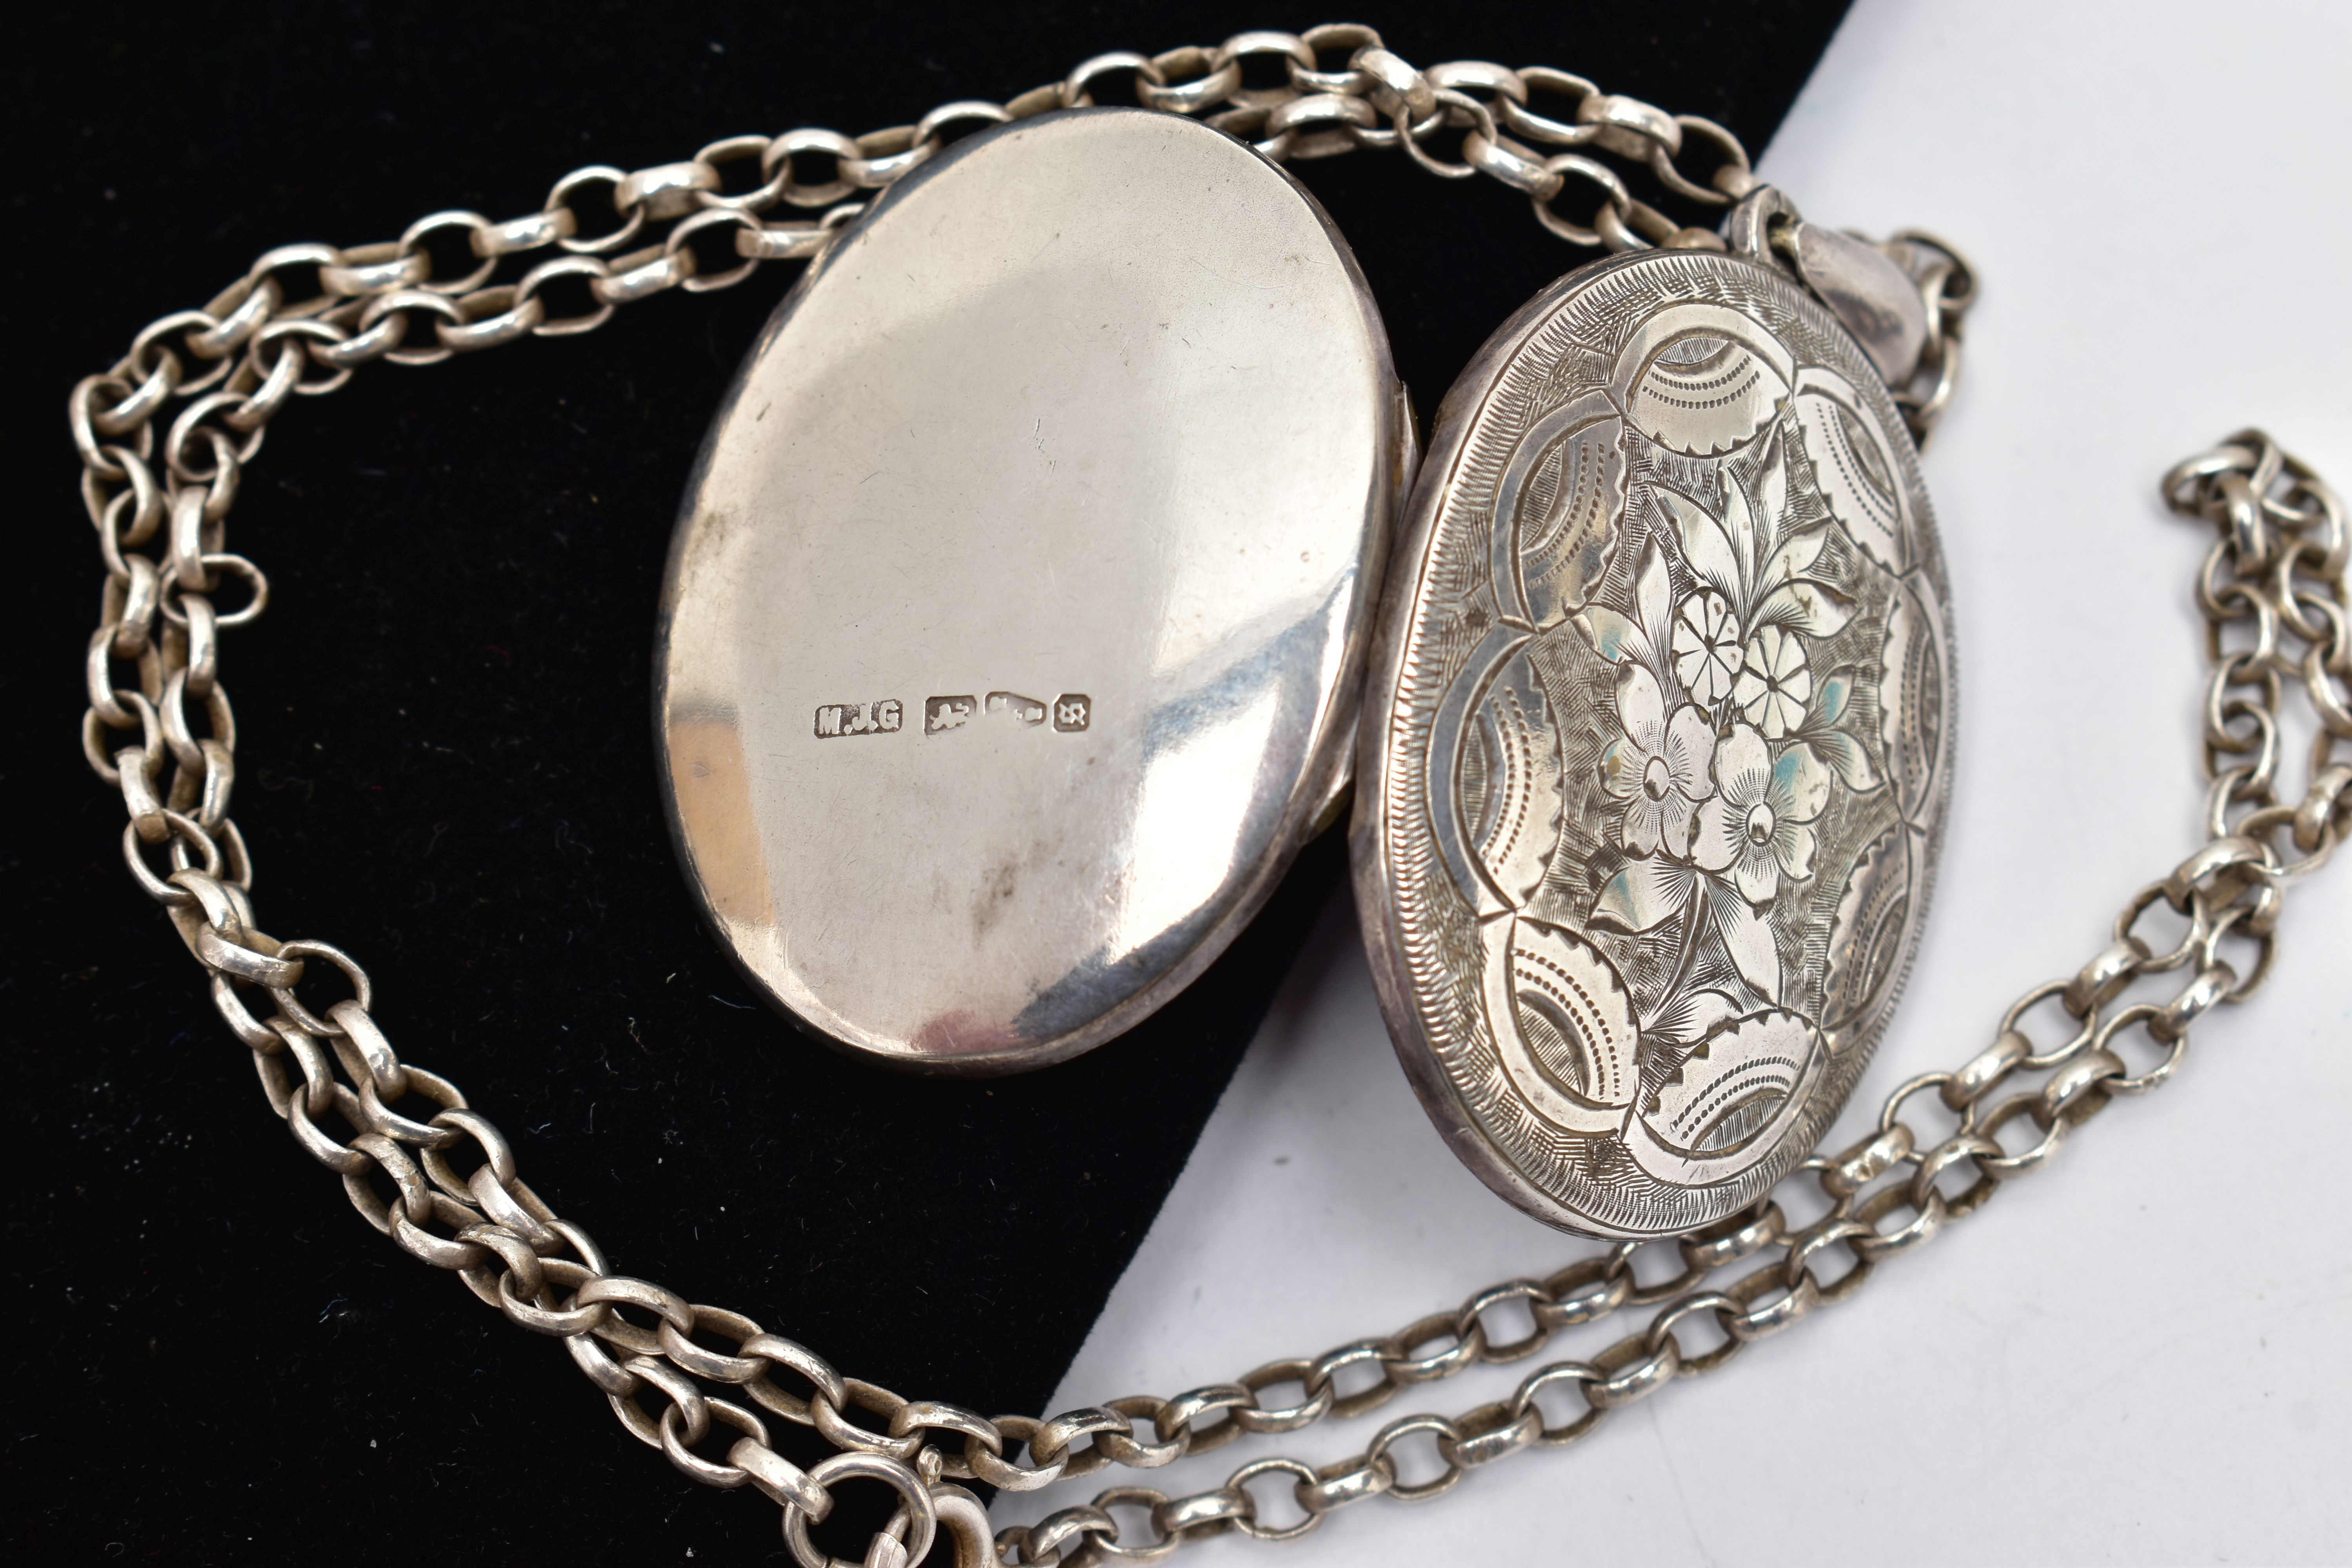 A LATE VICTORIAN SILVER LOCKET AND CHAIN, the oval locket detailed with a floral design, opens to - Image 3 of 3